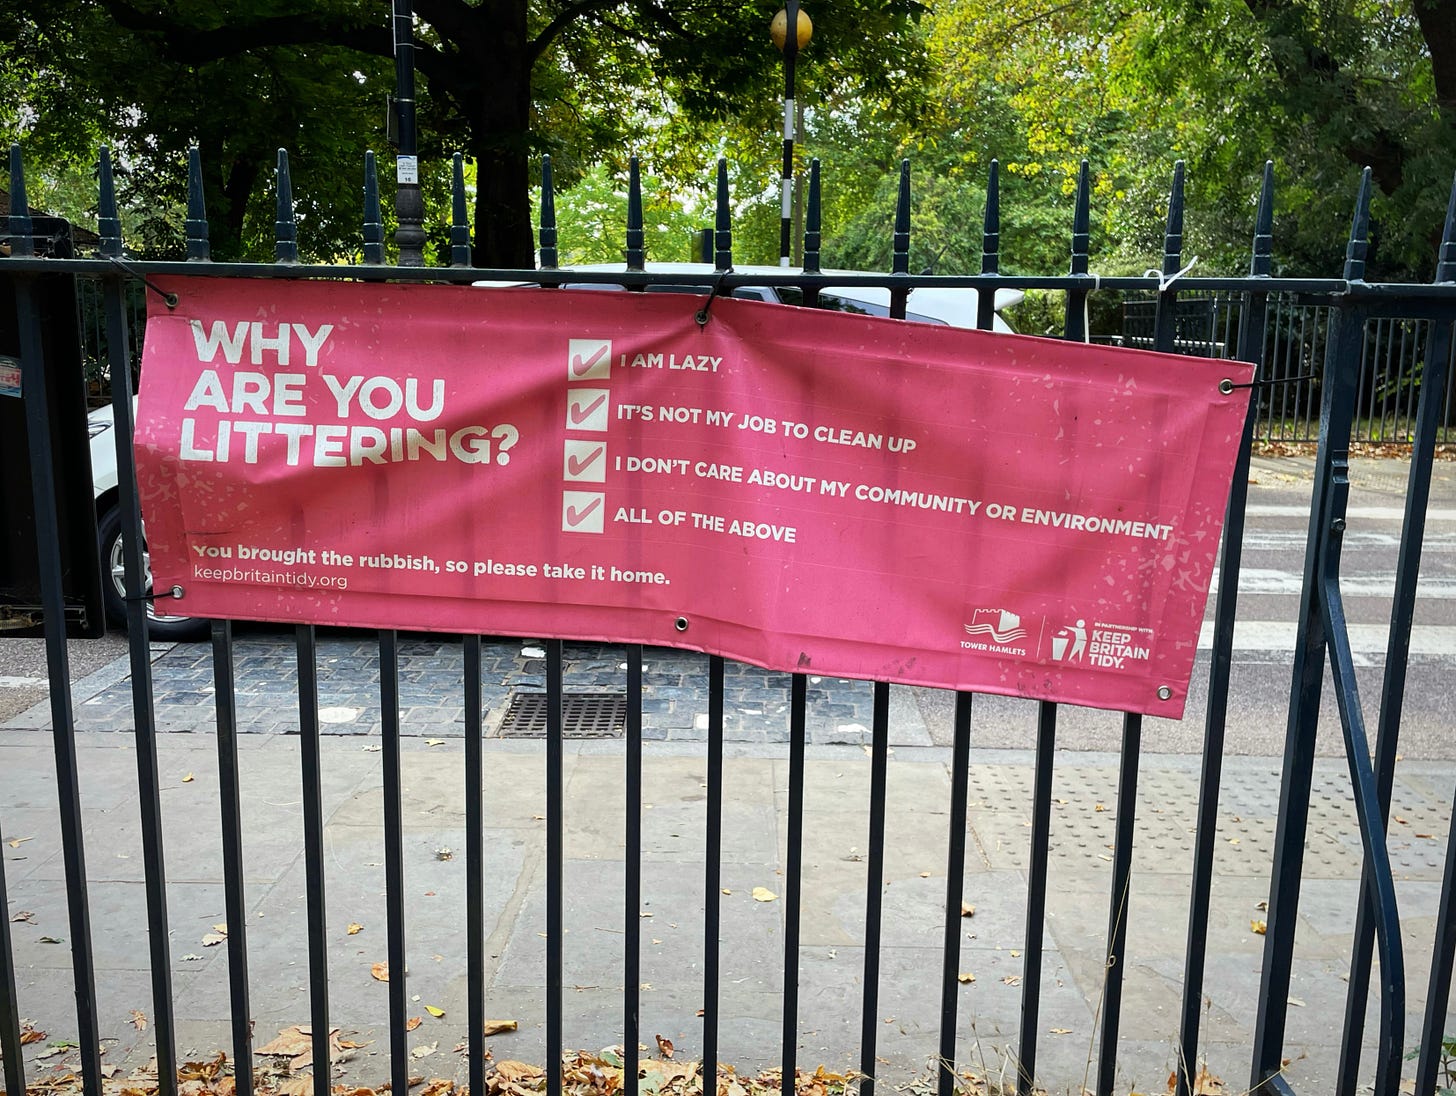 Red banner at Victoria Park London with white text that says 'Why are you littering?' and the words 'I am lazy, It's not my job to clean up, I don't care about my community or environment, all of the above